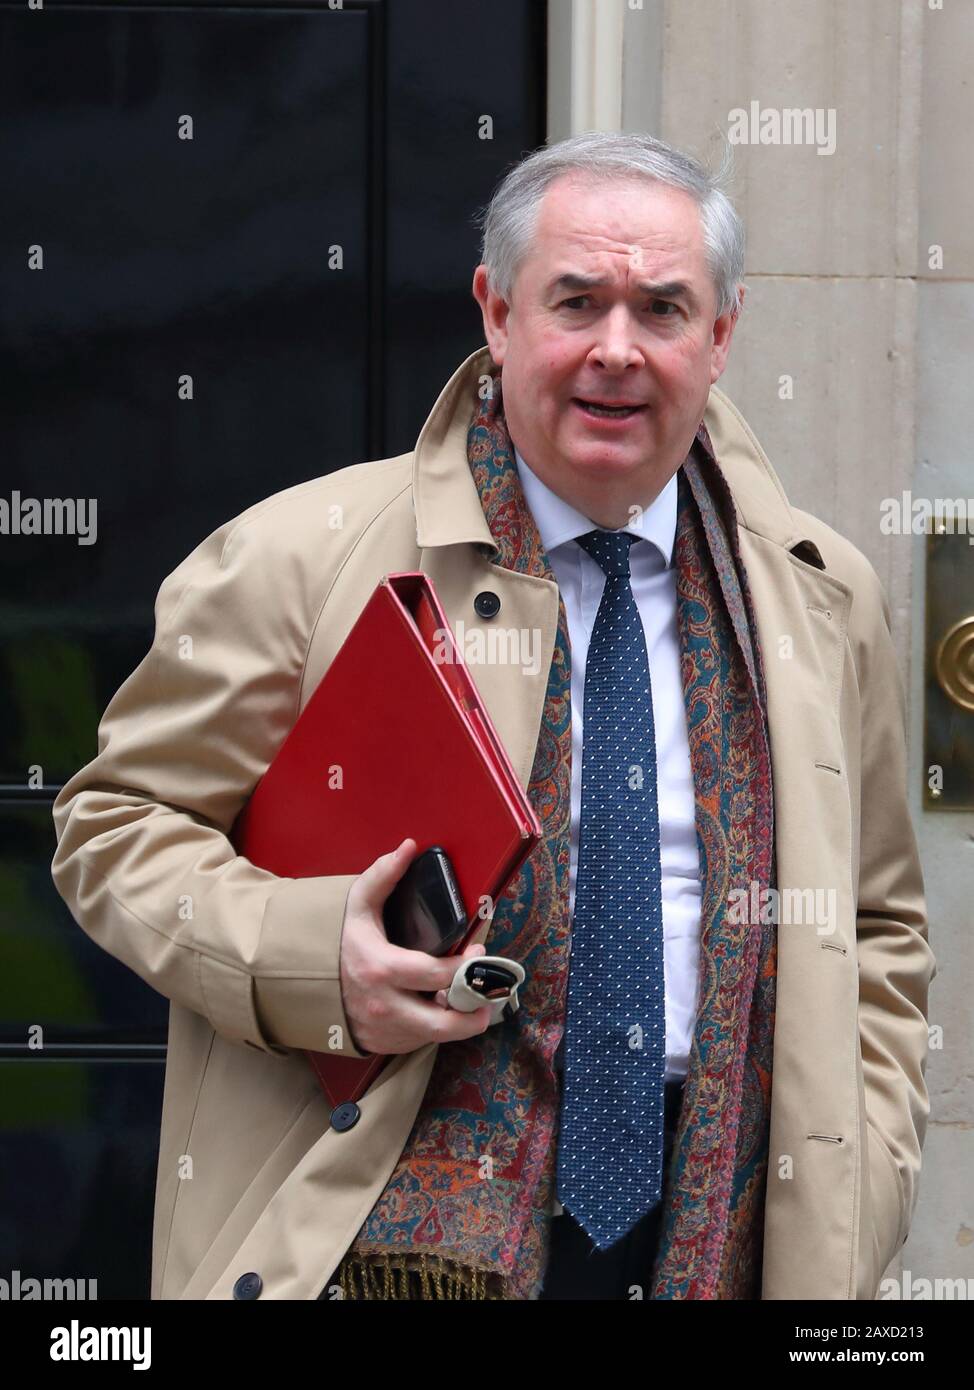 London, UK, 11th Feb 2020, Attorney General Geoffrey Cox leaving after the weekly Cabinet Meeting. Credit: Uwe Deffner / Alamy Live News. Live News. Stock Photo